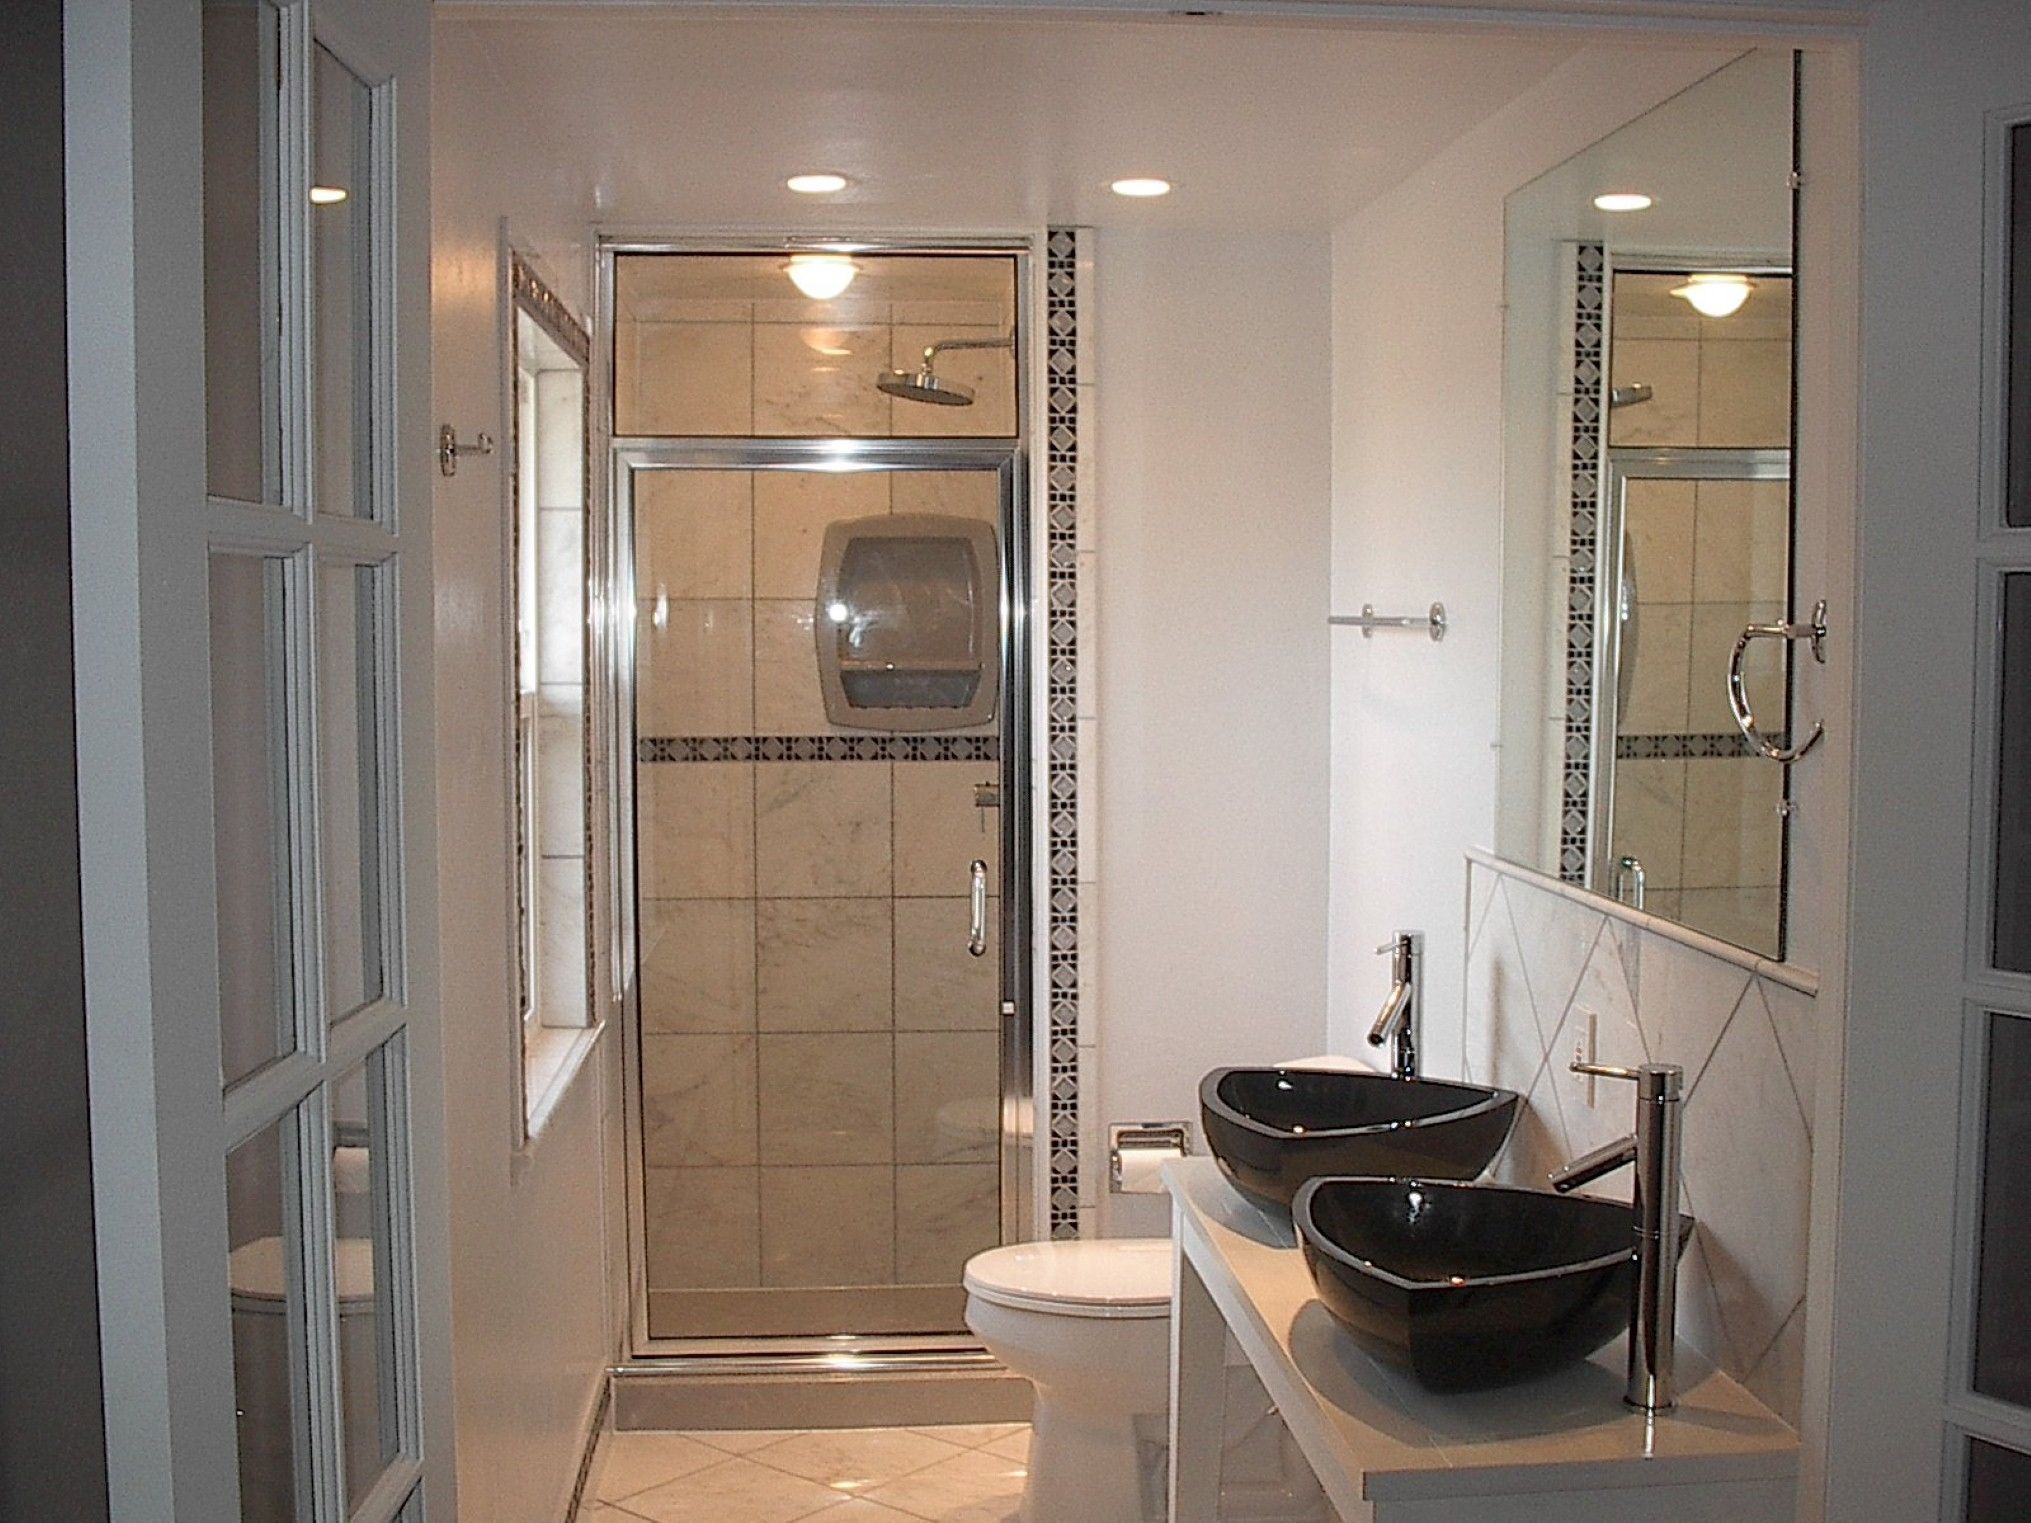 Spacious Photo Gallery As Bathroom Design Tool And To The Inspiration Bathroom Your Home (View 3 of 29)